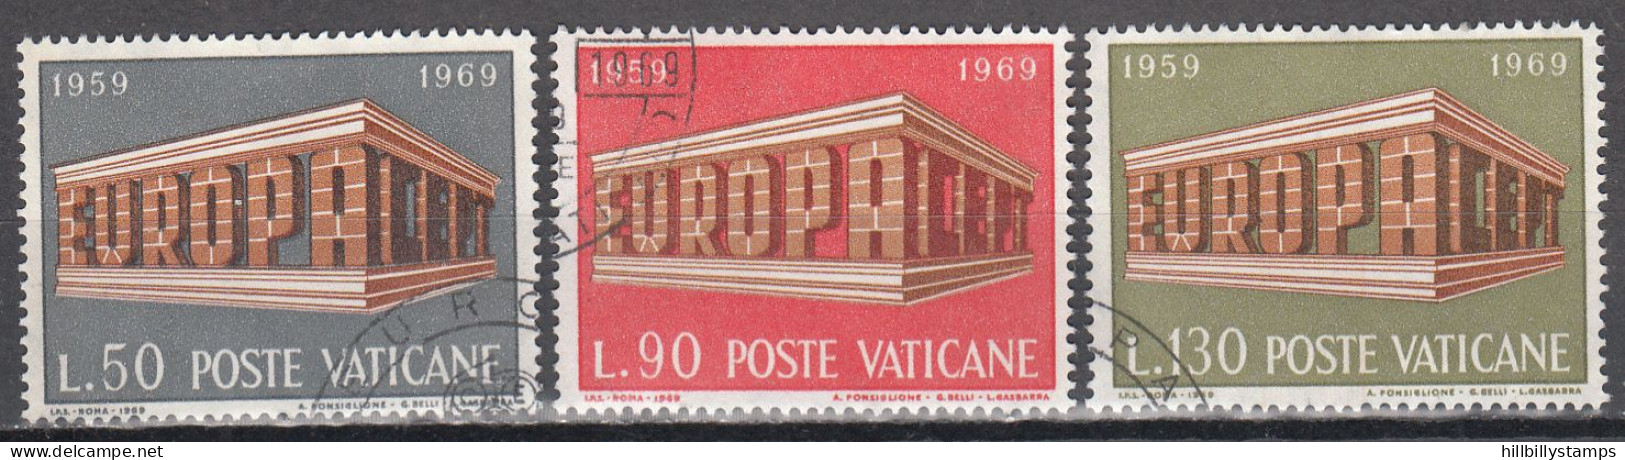 VATICAN   SCOTT NO 470-72   USED   YEAR  1969 - Used Stamps